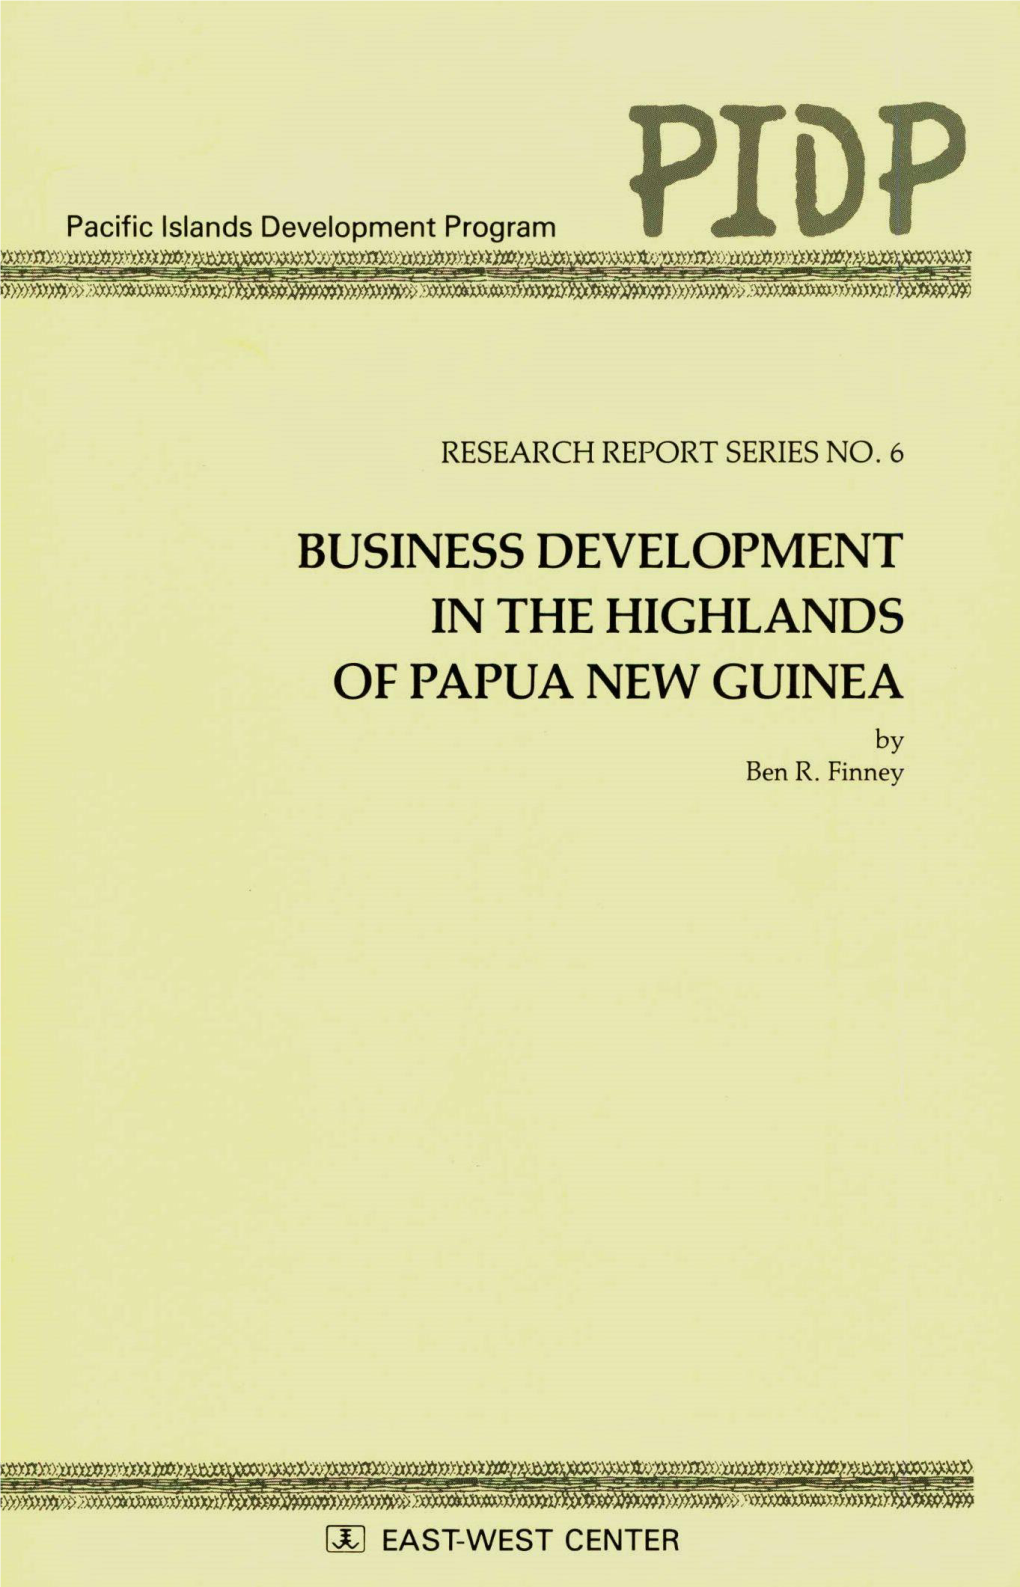 BUSINESS DEVELOPMENT in the HIGHLANDS of PAPUA NEW GUINEA by Ben R